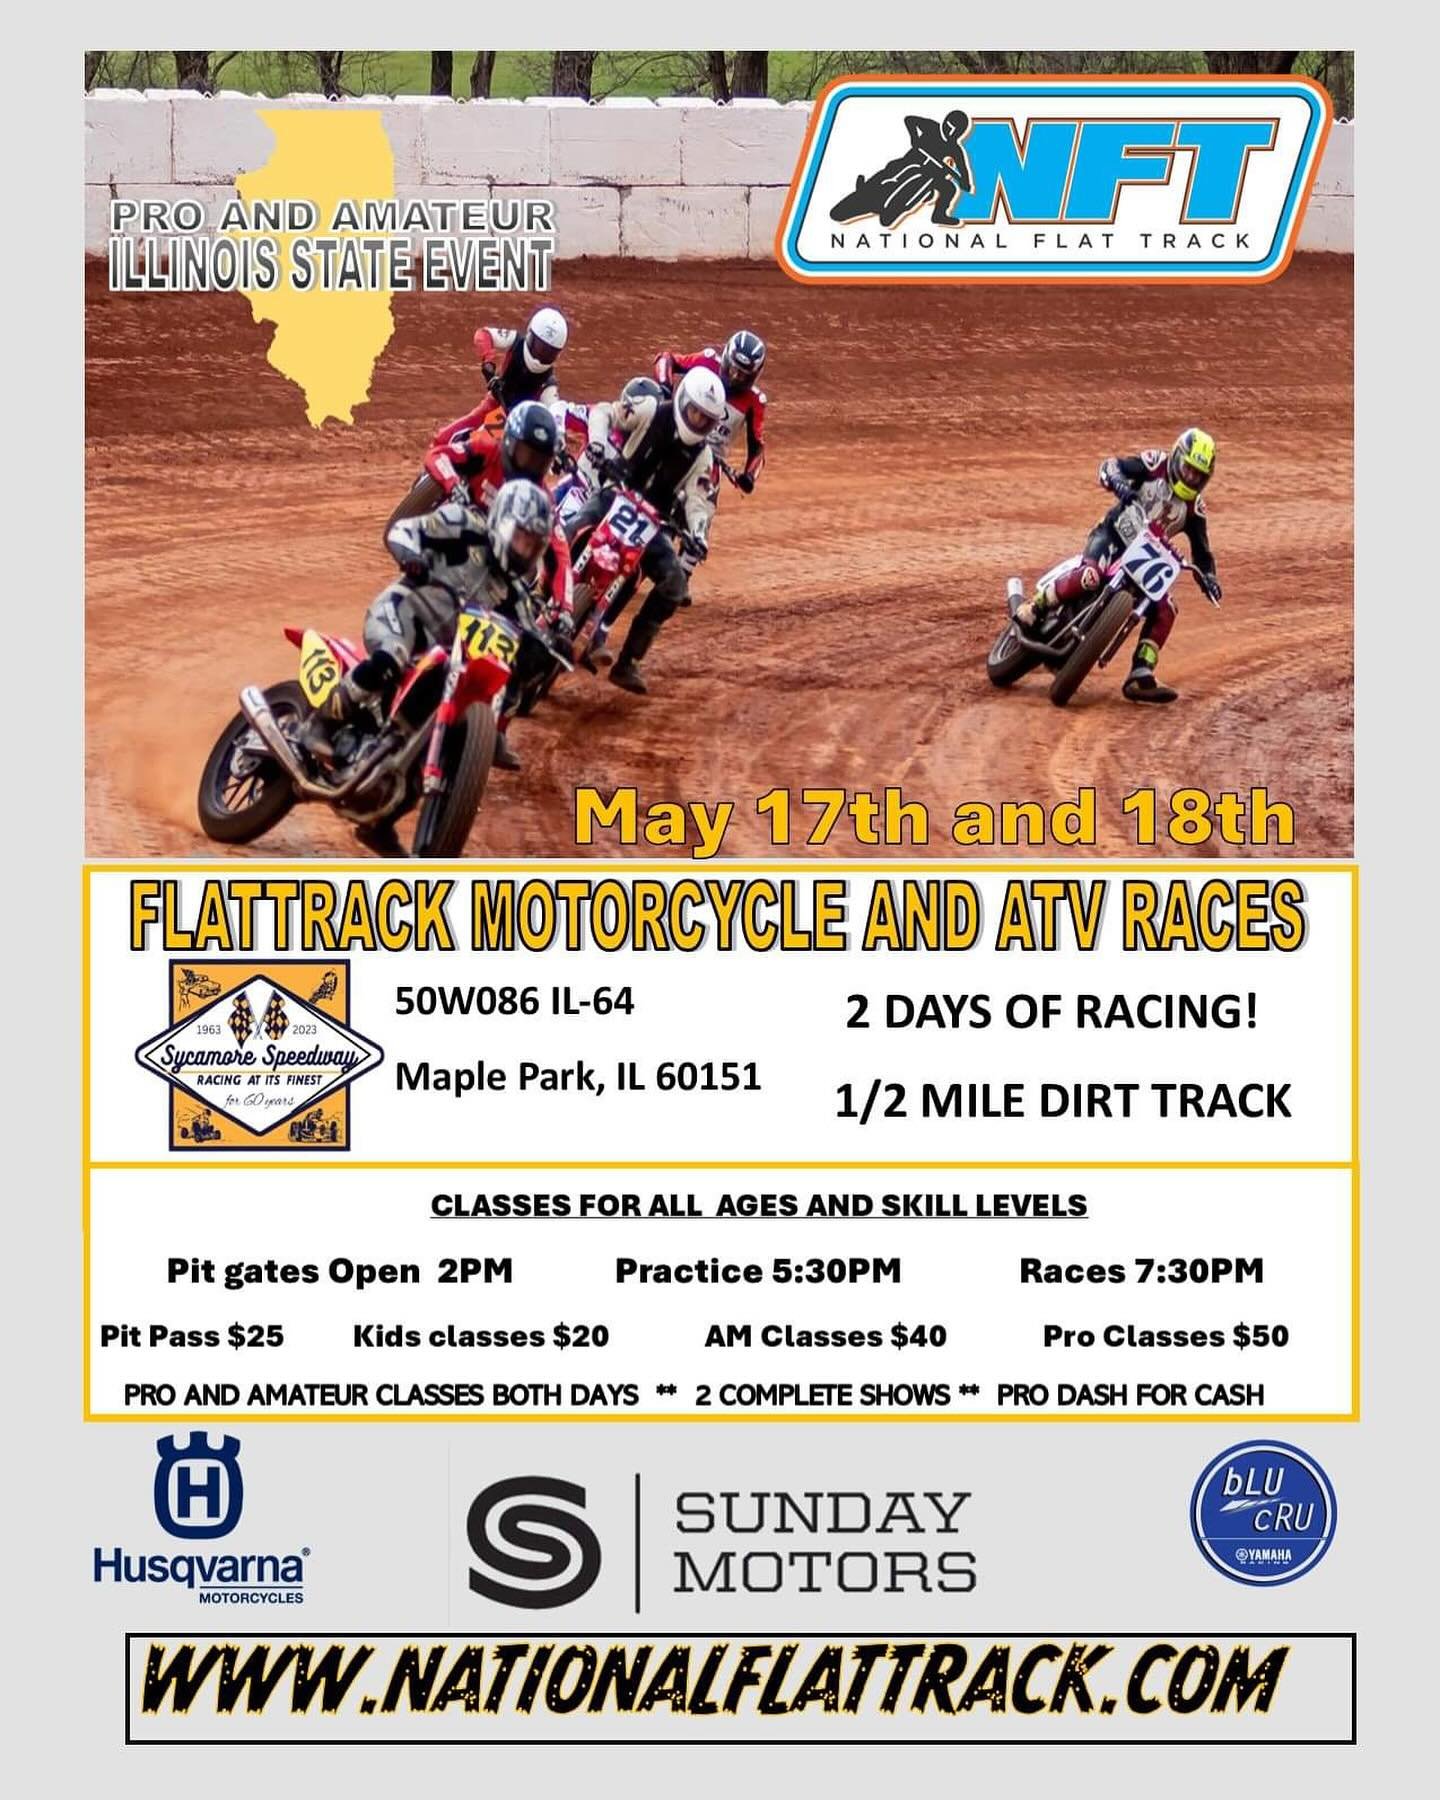 We are coming to Illinois!
Motorcycle and ATV Flattrack racing at the World famous @sycamorespeedway 1/2 mile May 17th and 18th. This Illinois State event will feature Pro and Amateur racing BOTH DAYS!  Please share! #nationalflattrack #nationalflatt